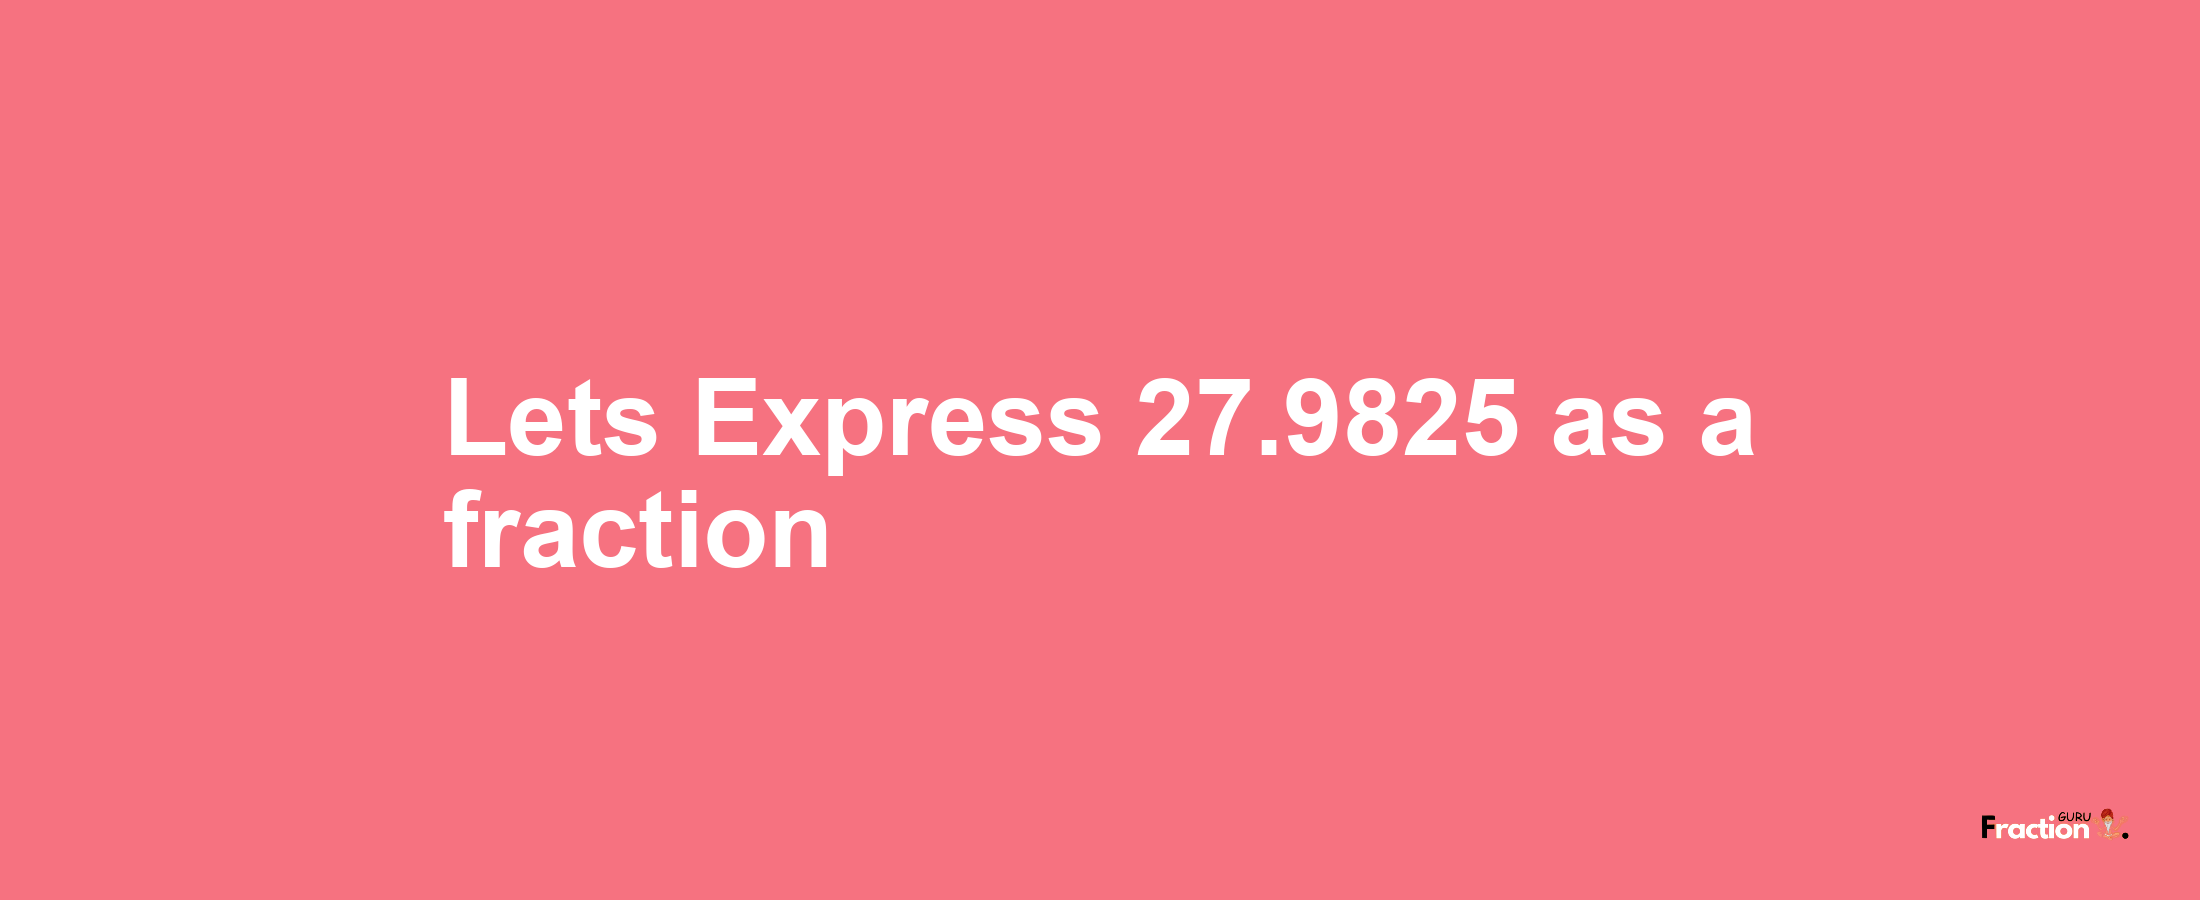 Lets Express 27.9825 as afraction